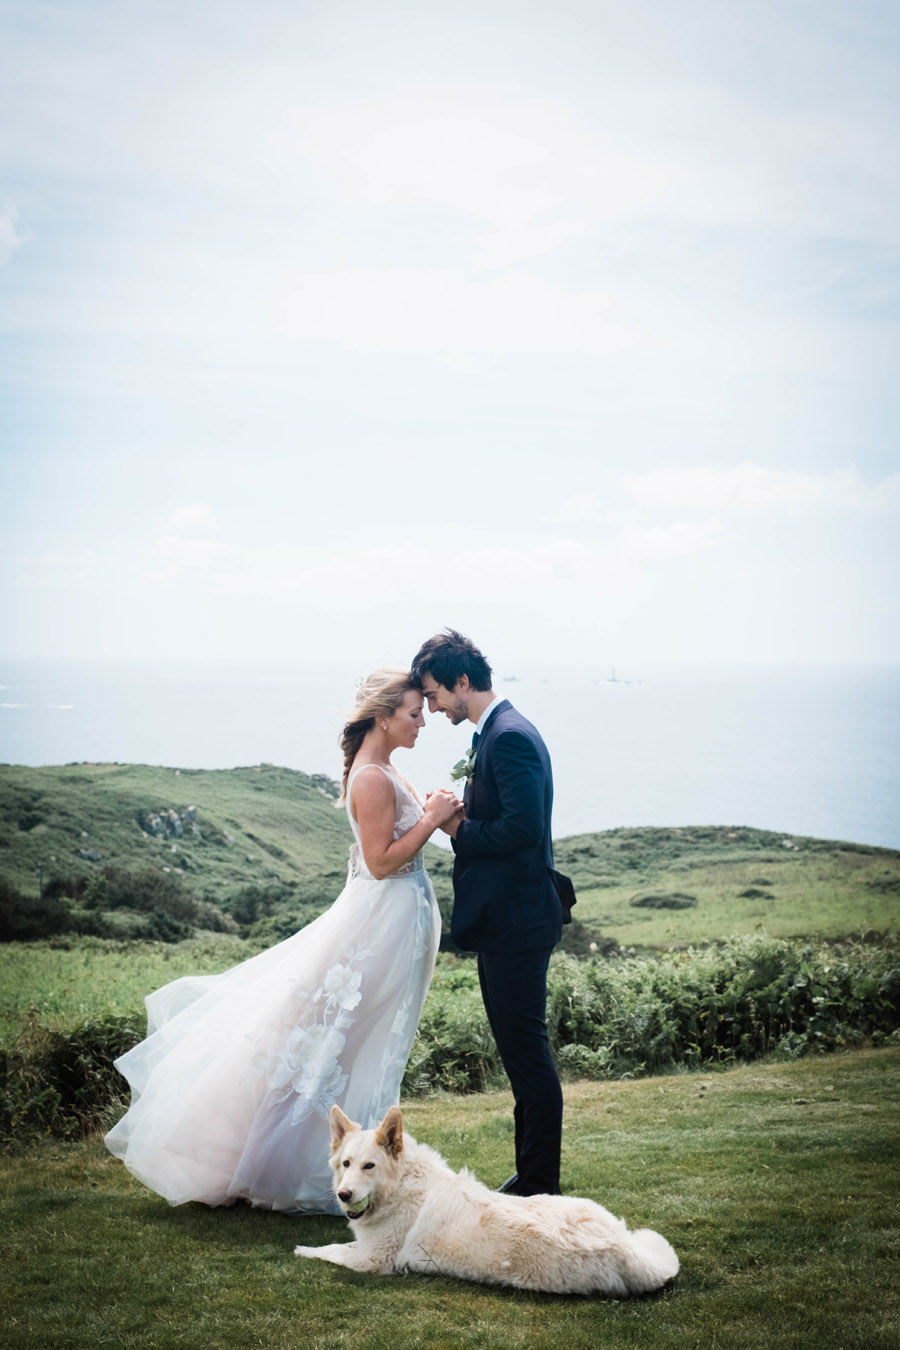 Cornwall festival weddings with Wild Tipi, image by Verity Westcott Photography (14)